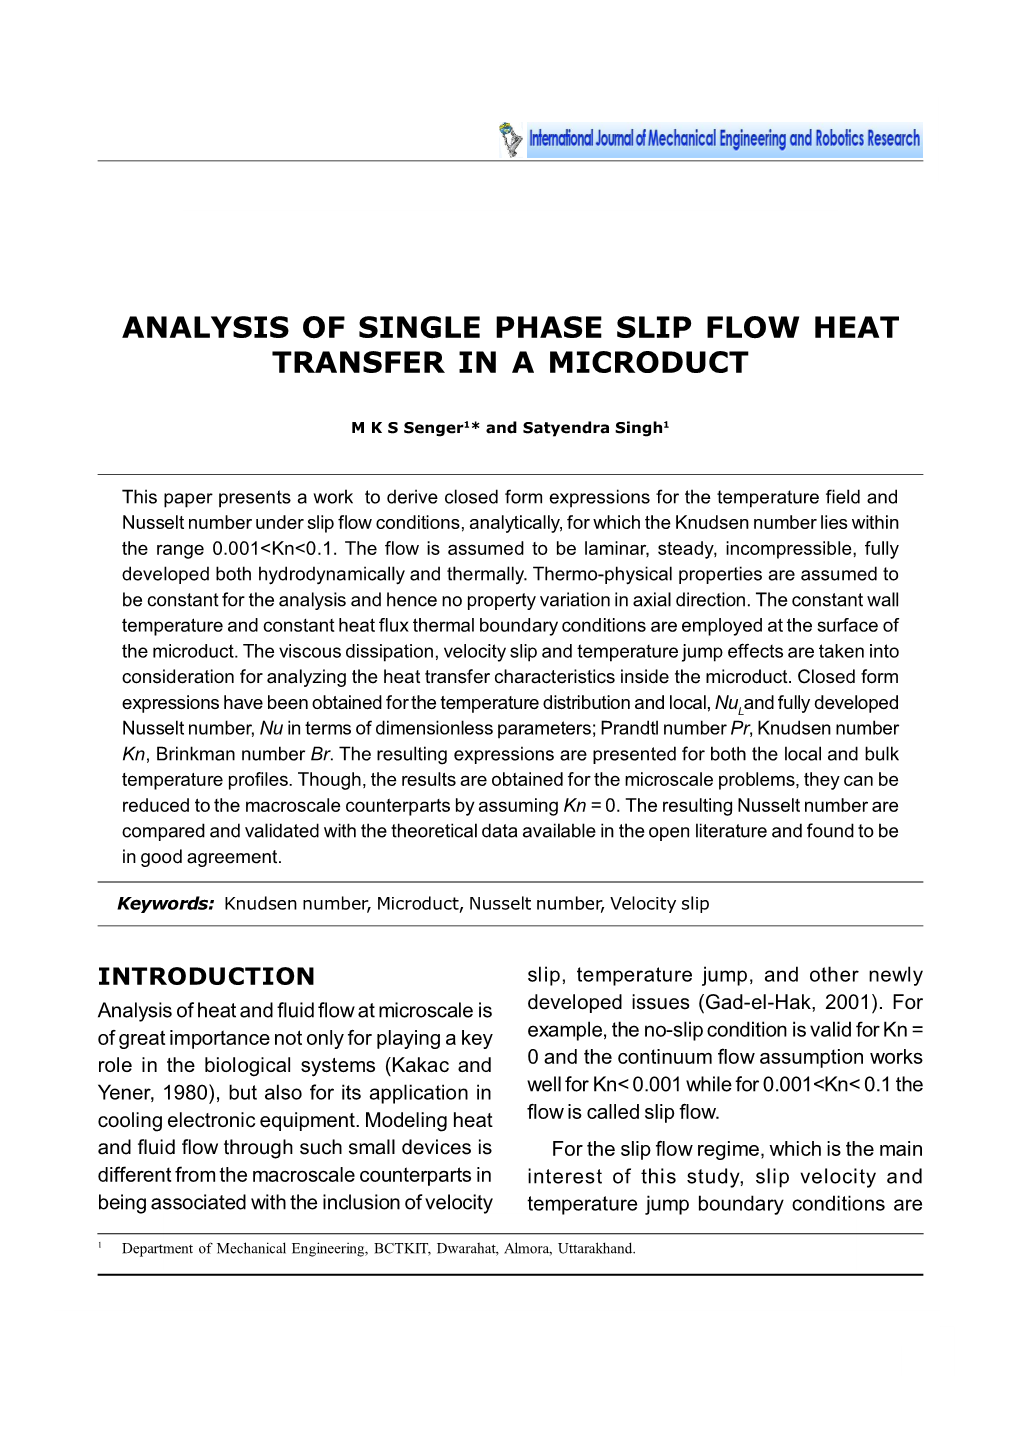 Analysis of Single Phase Slip Flow Heat Transfer in a Microduct